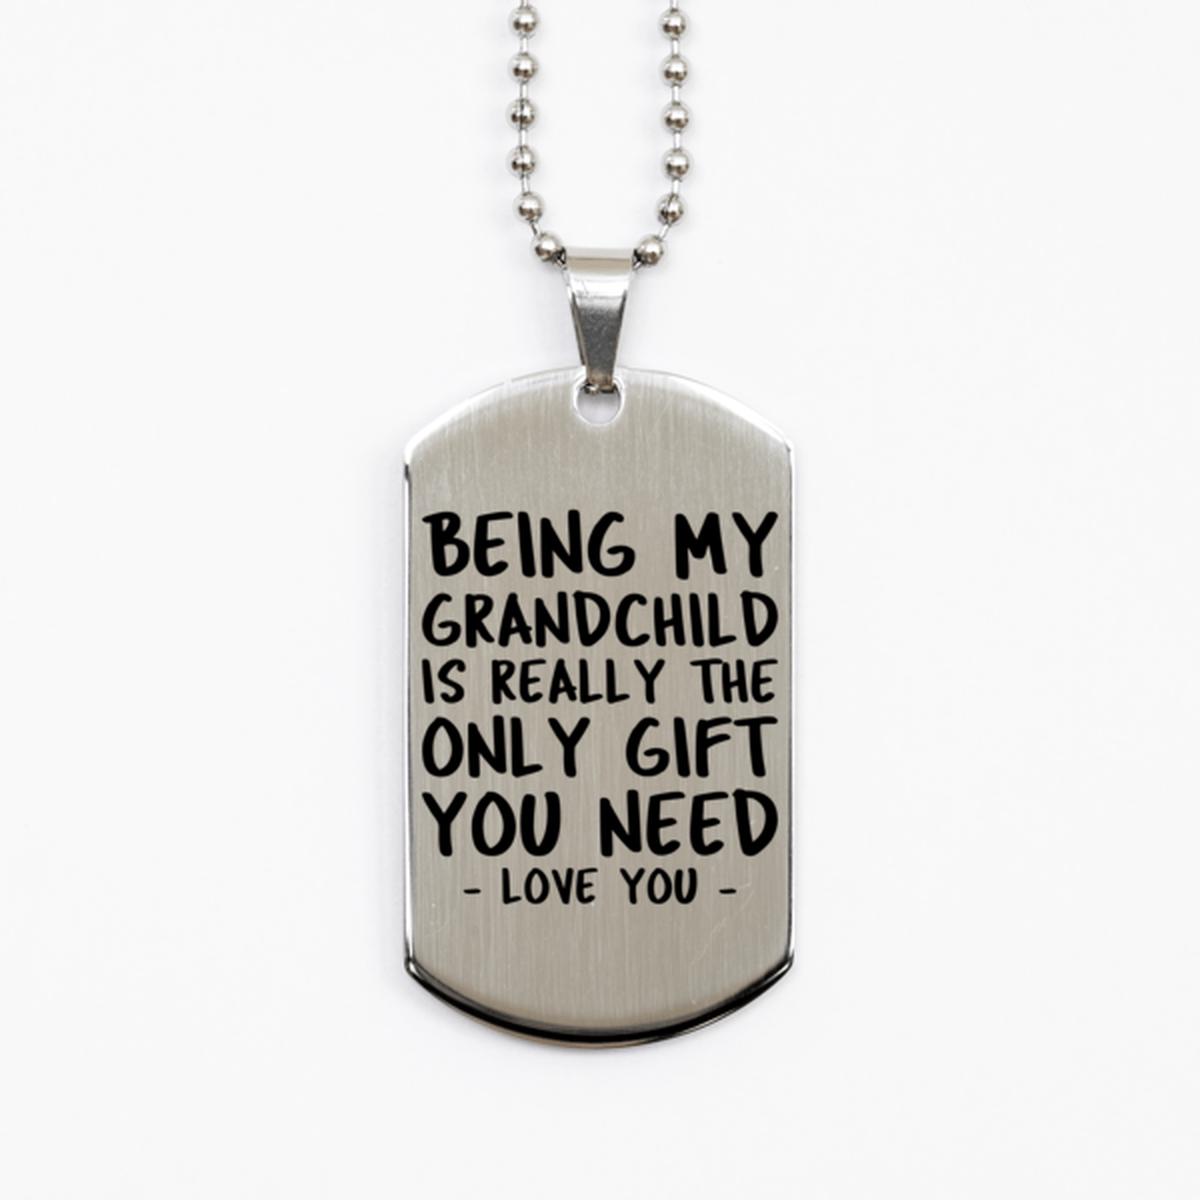 Funny Grandchild Silver Dog Tag Necklace, Being My Grandchild Is Really the Only Gift You Need, Best Birthday Gifts for Grandchild